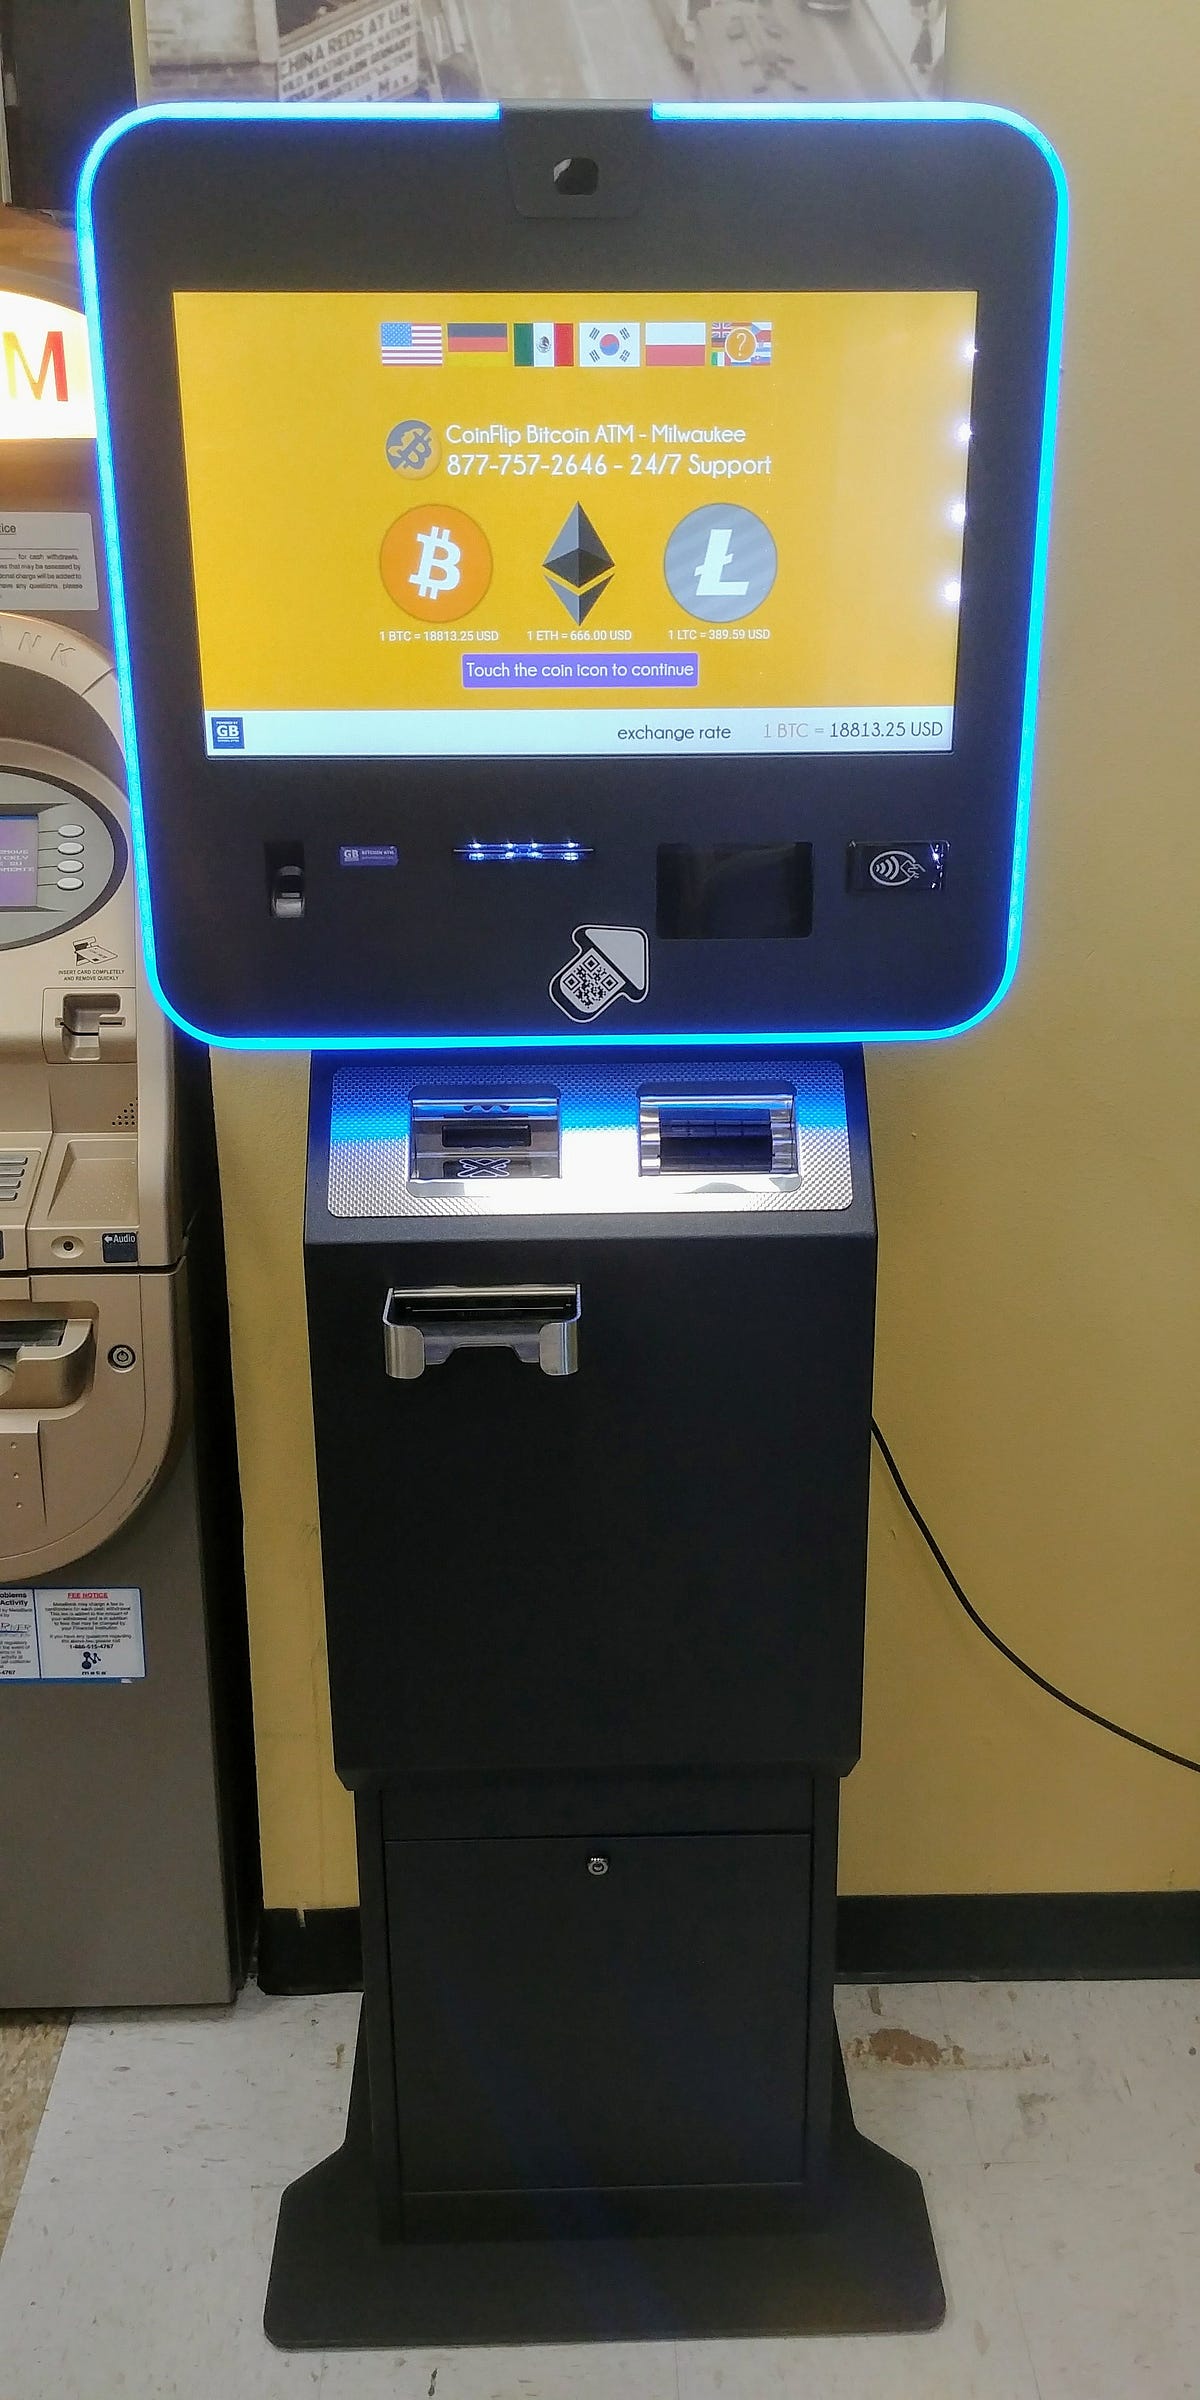 How to buy bitcoin with cash through a bitcoin atm coinflip cryptocurrency atm